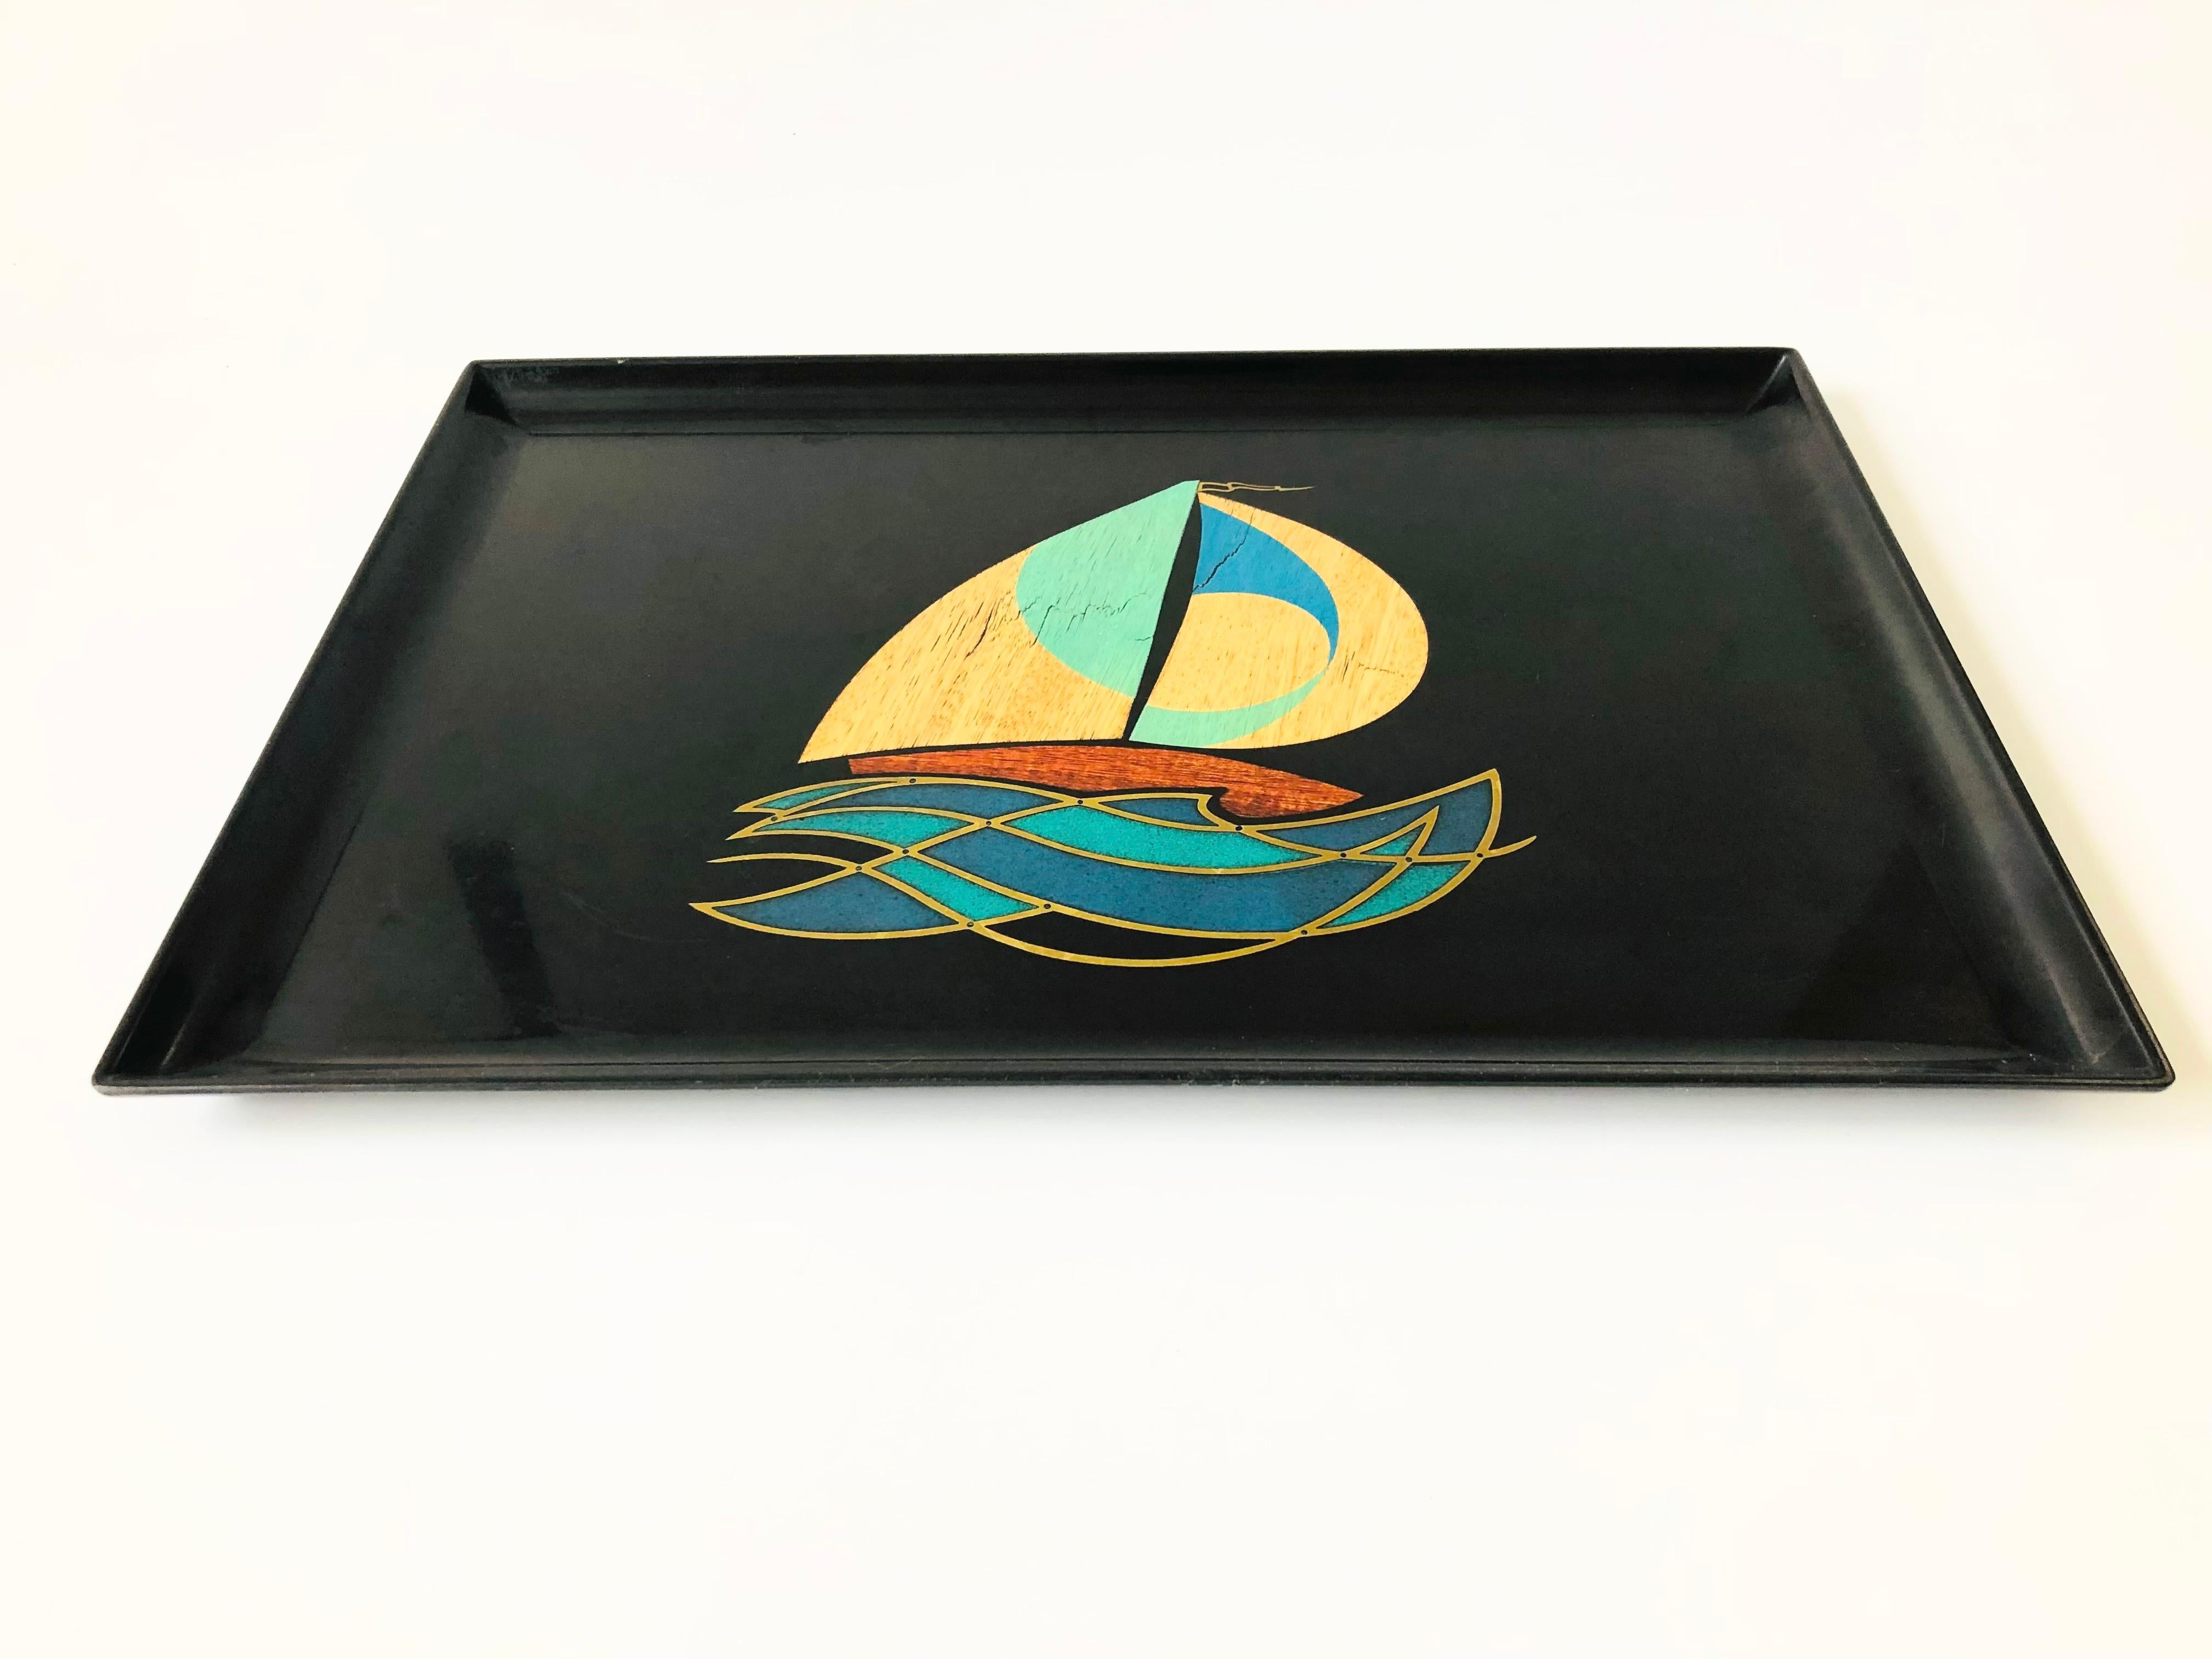 A large vintage rectangular resin tray. Small pieces of metal and wood have been inlaid into the surface to create a sailboat design. Made by Couroc.
 